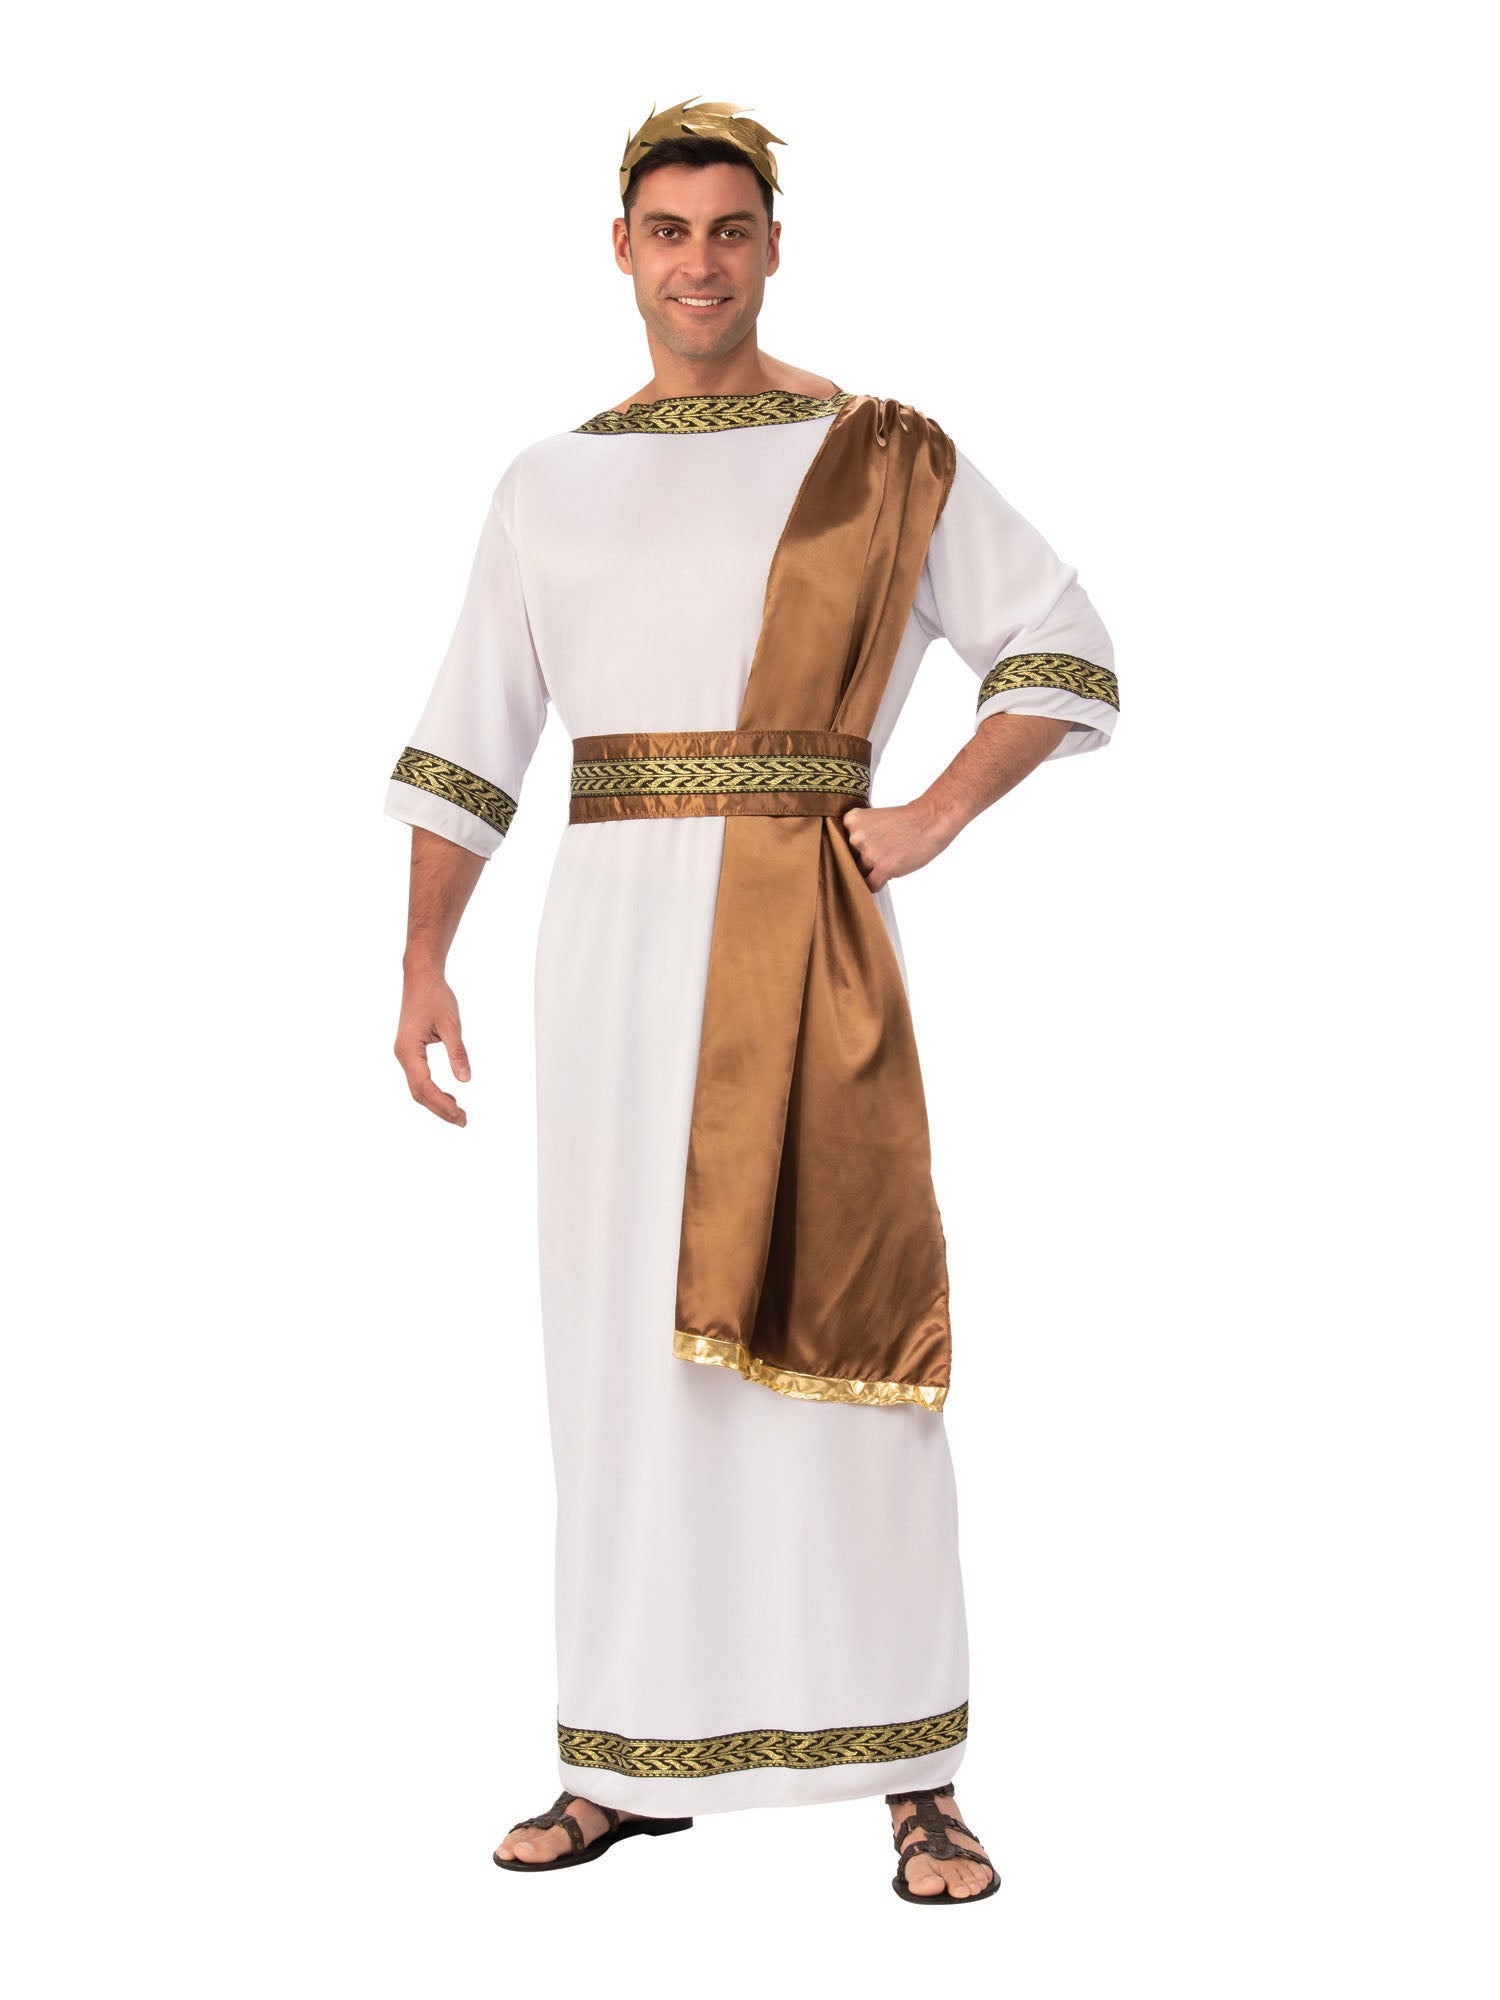 Greek, Multi, Generic, Adult Costume, Extra Large, Front